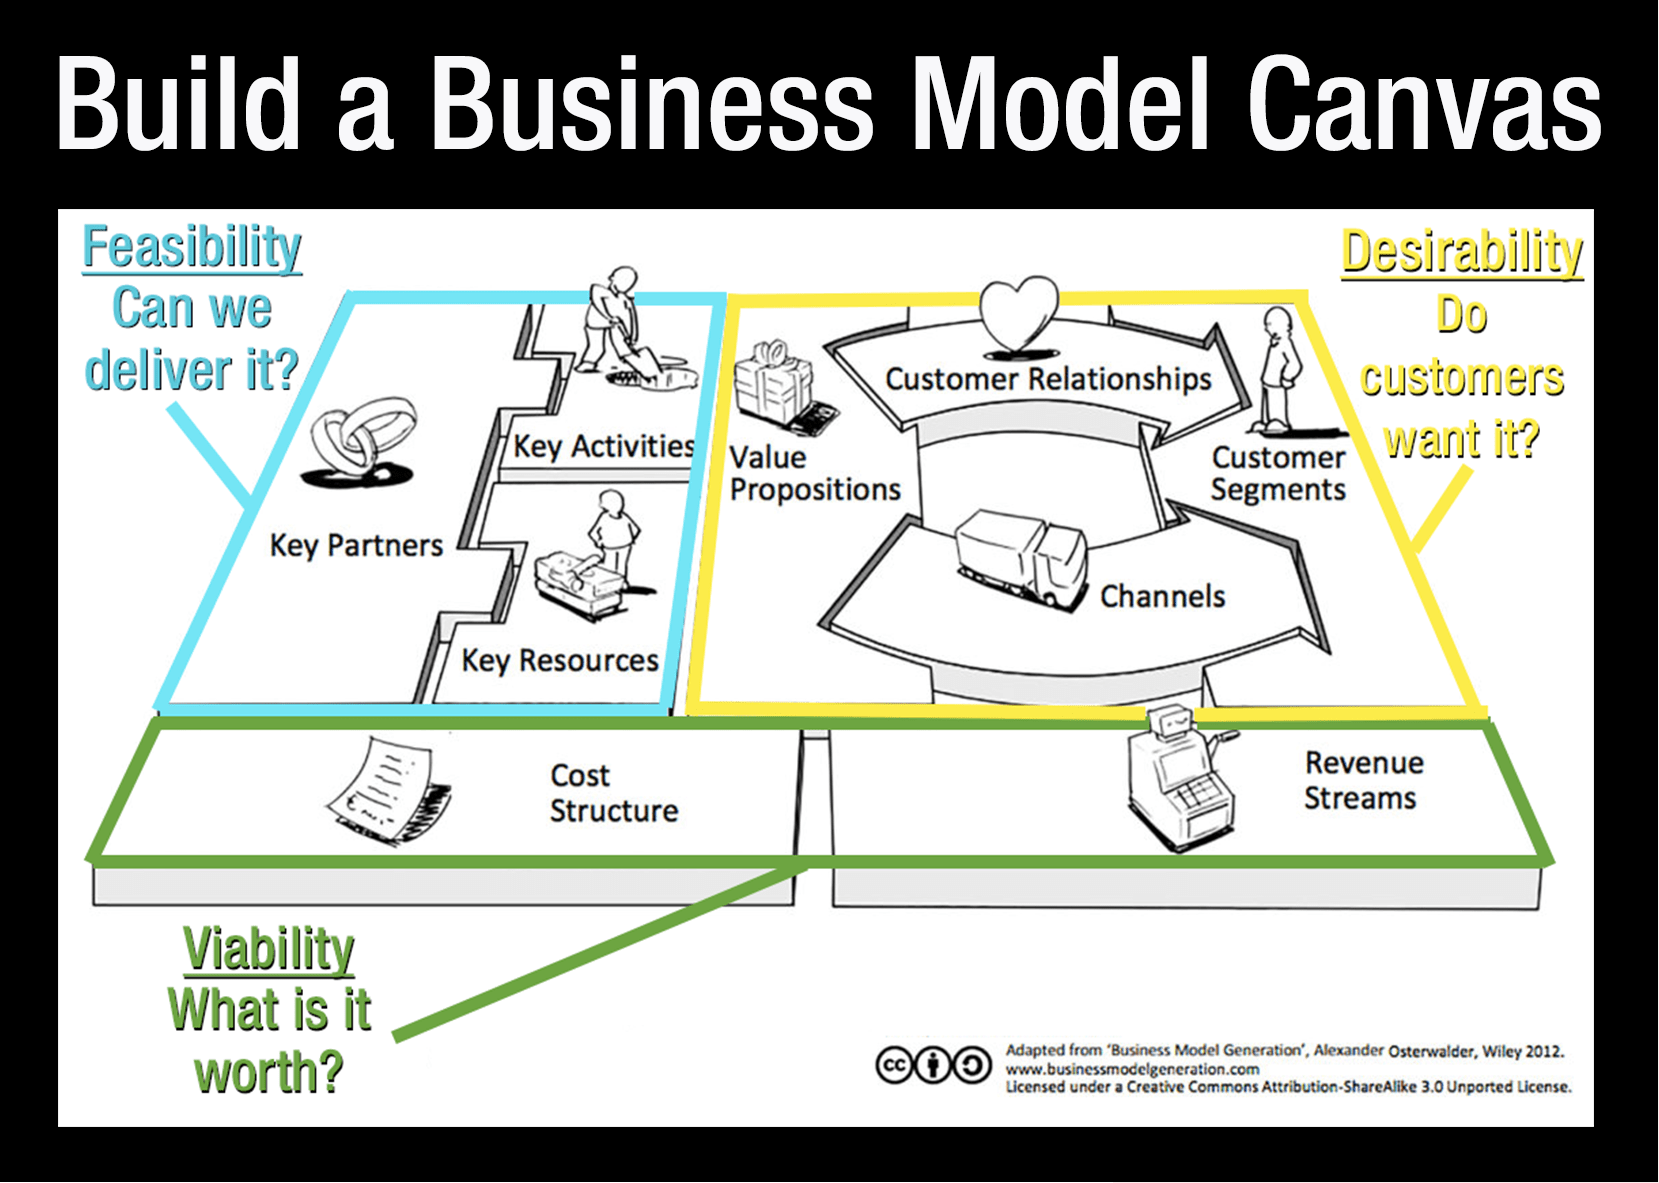 Business Model Canvas graphic